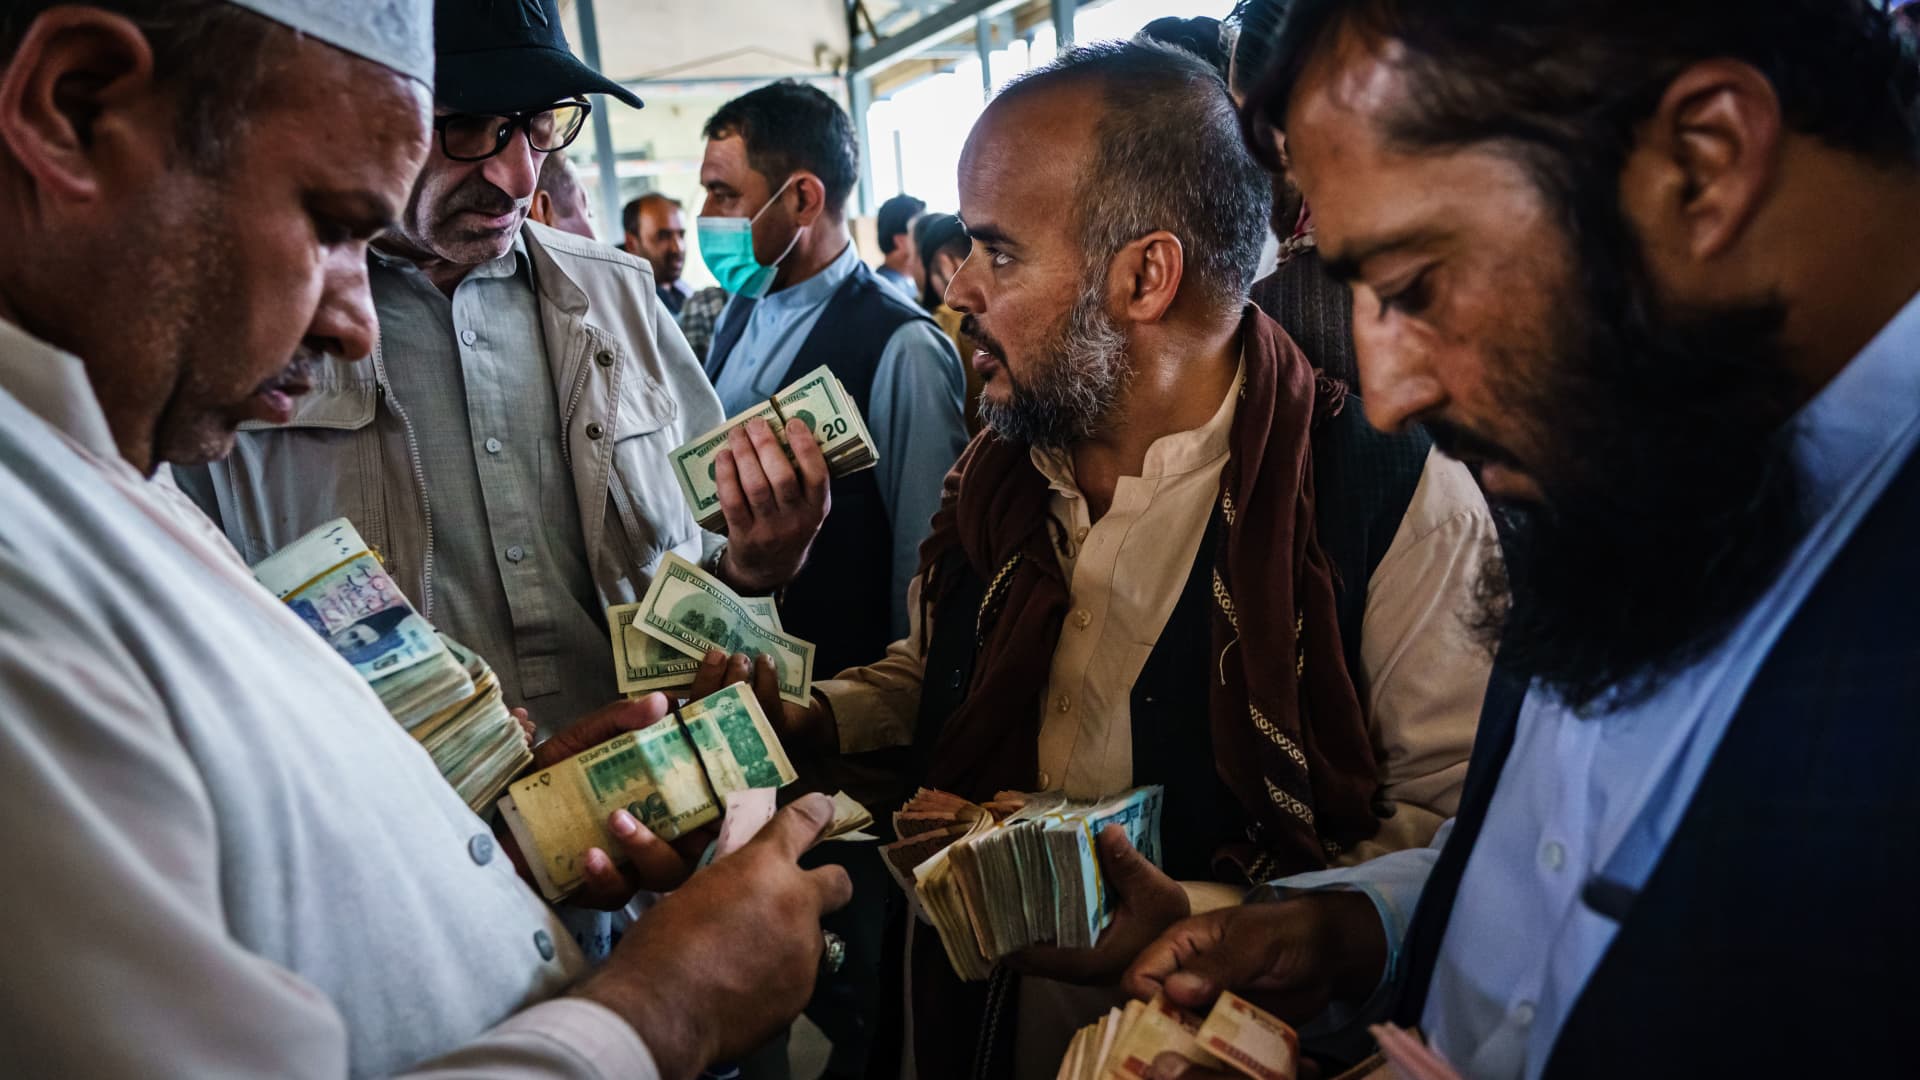 Money exchangers engage in intense negotiations in the Sarai Shahzadah, Kabul's currency exchange market, which is reopening for the first time since the Taliban took over, in Kabul, Afghanistan, Saturday, Sept. 4, 2021.